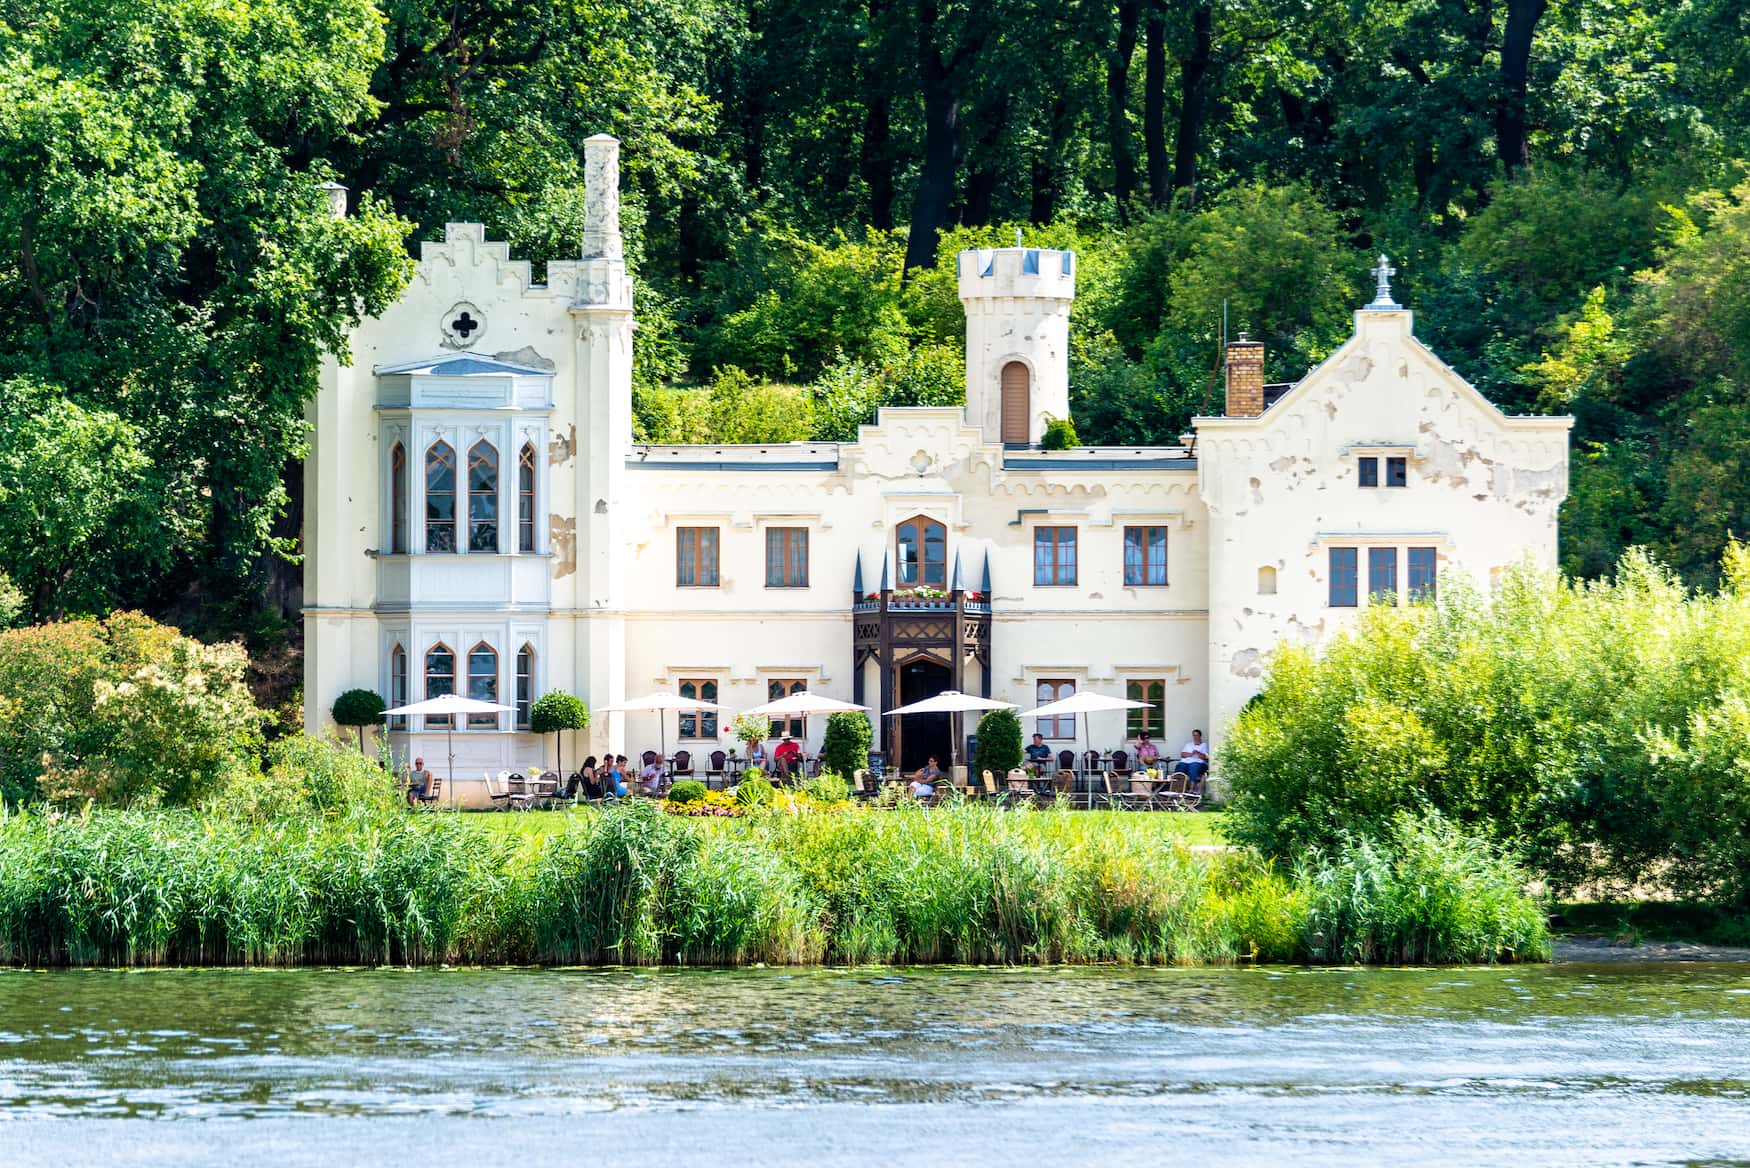 Small castle of the Park Babelsberg in Potsdam, which is used as a restaurant. The small castle was photographed from the water and is called garden hous